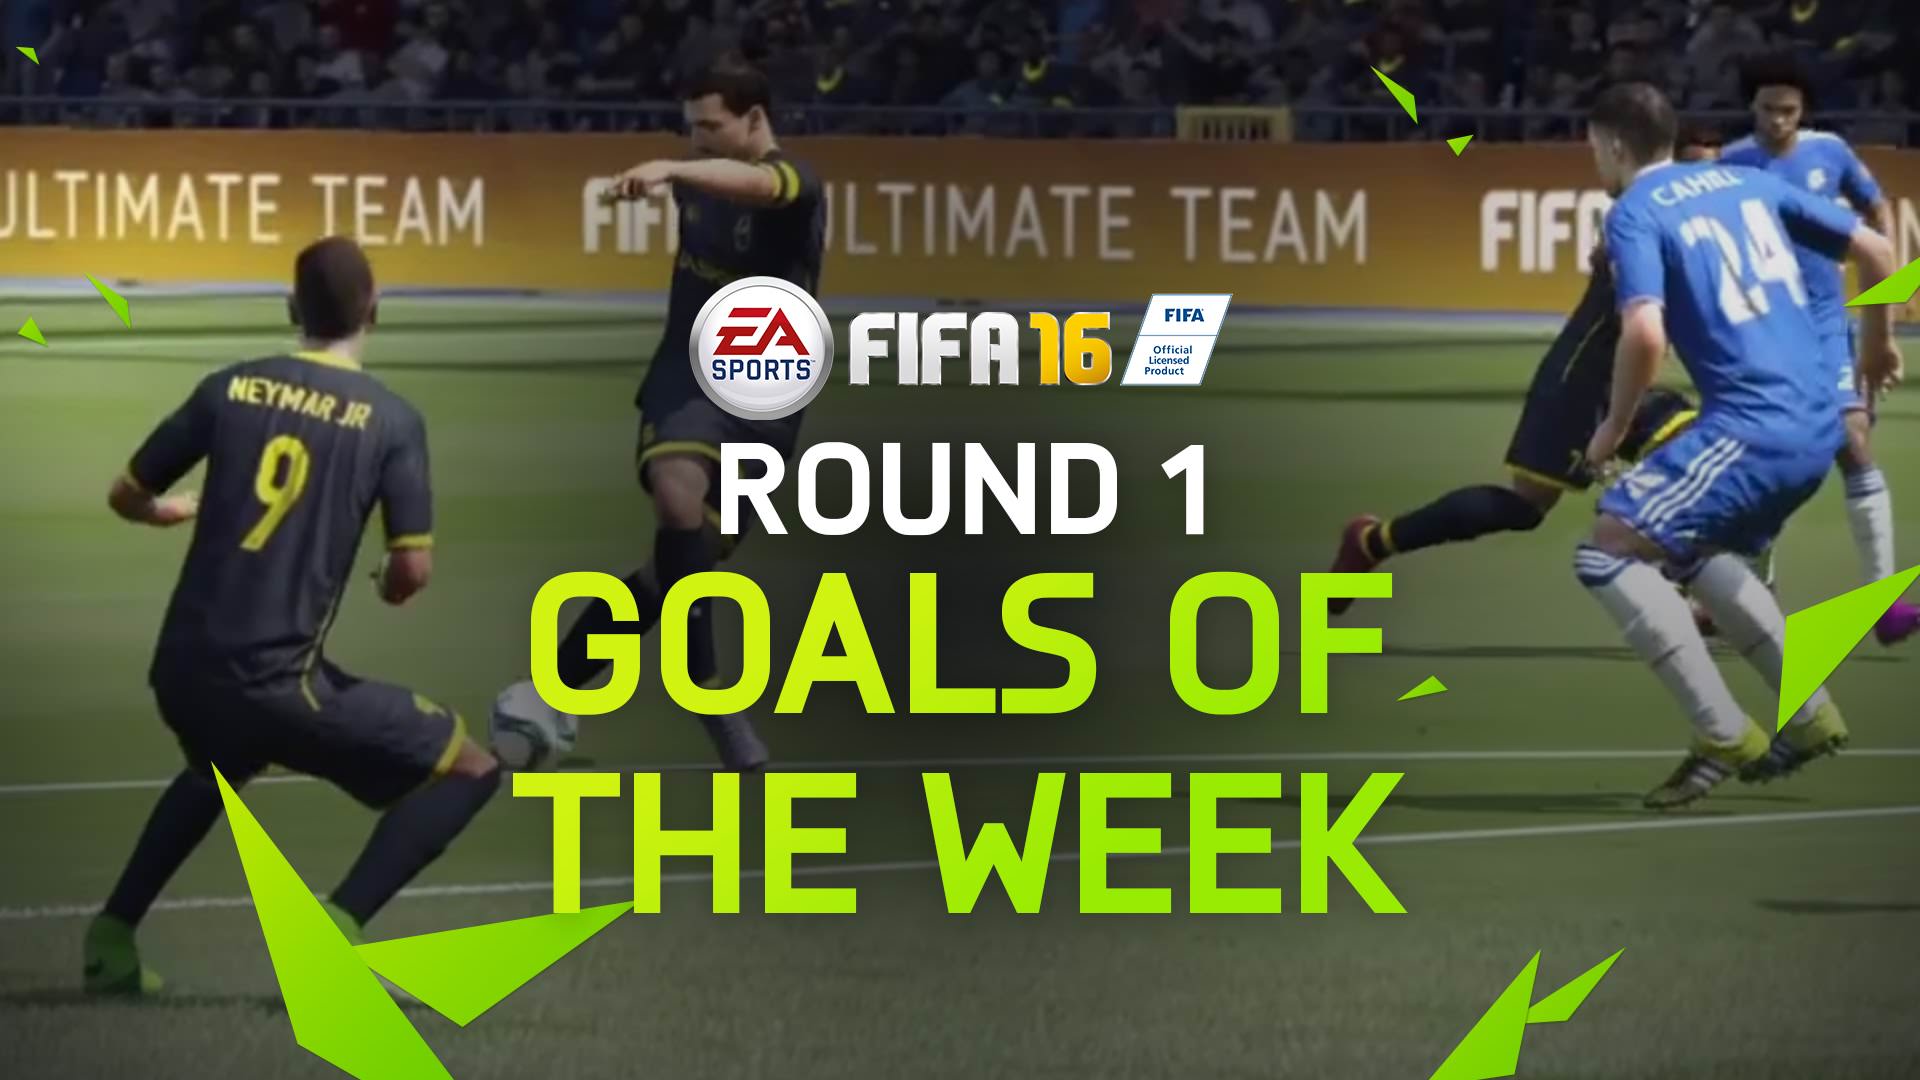 FIFA 16 Goals of the Week